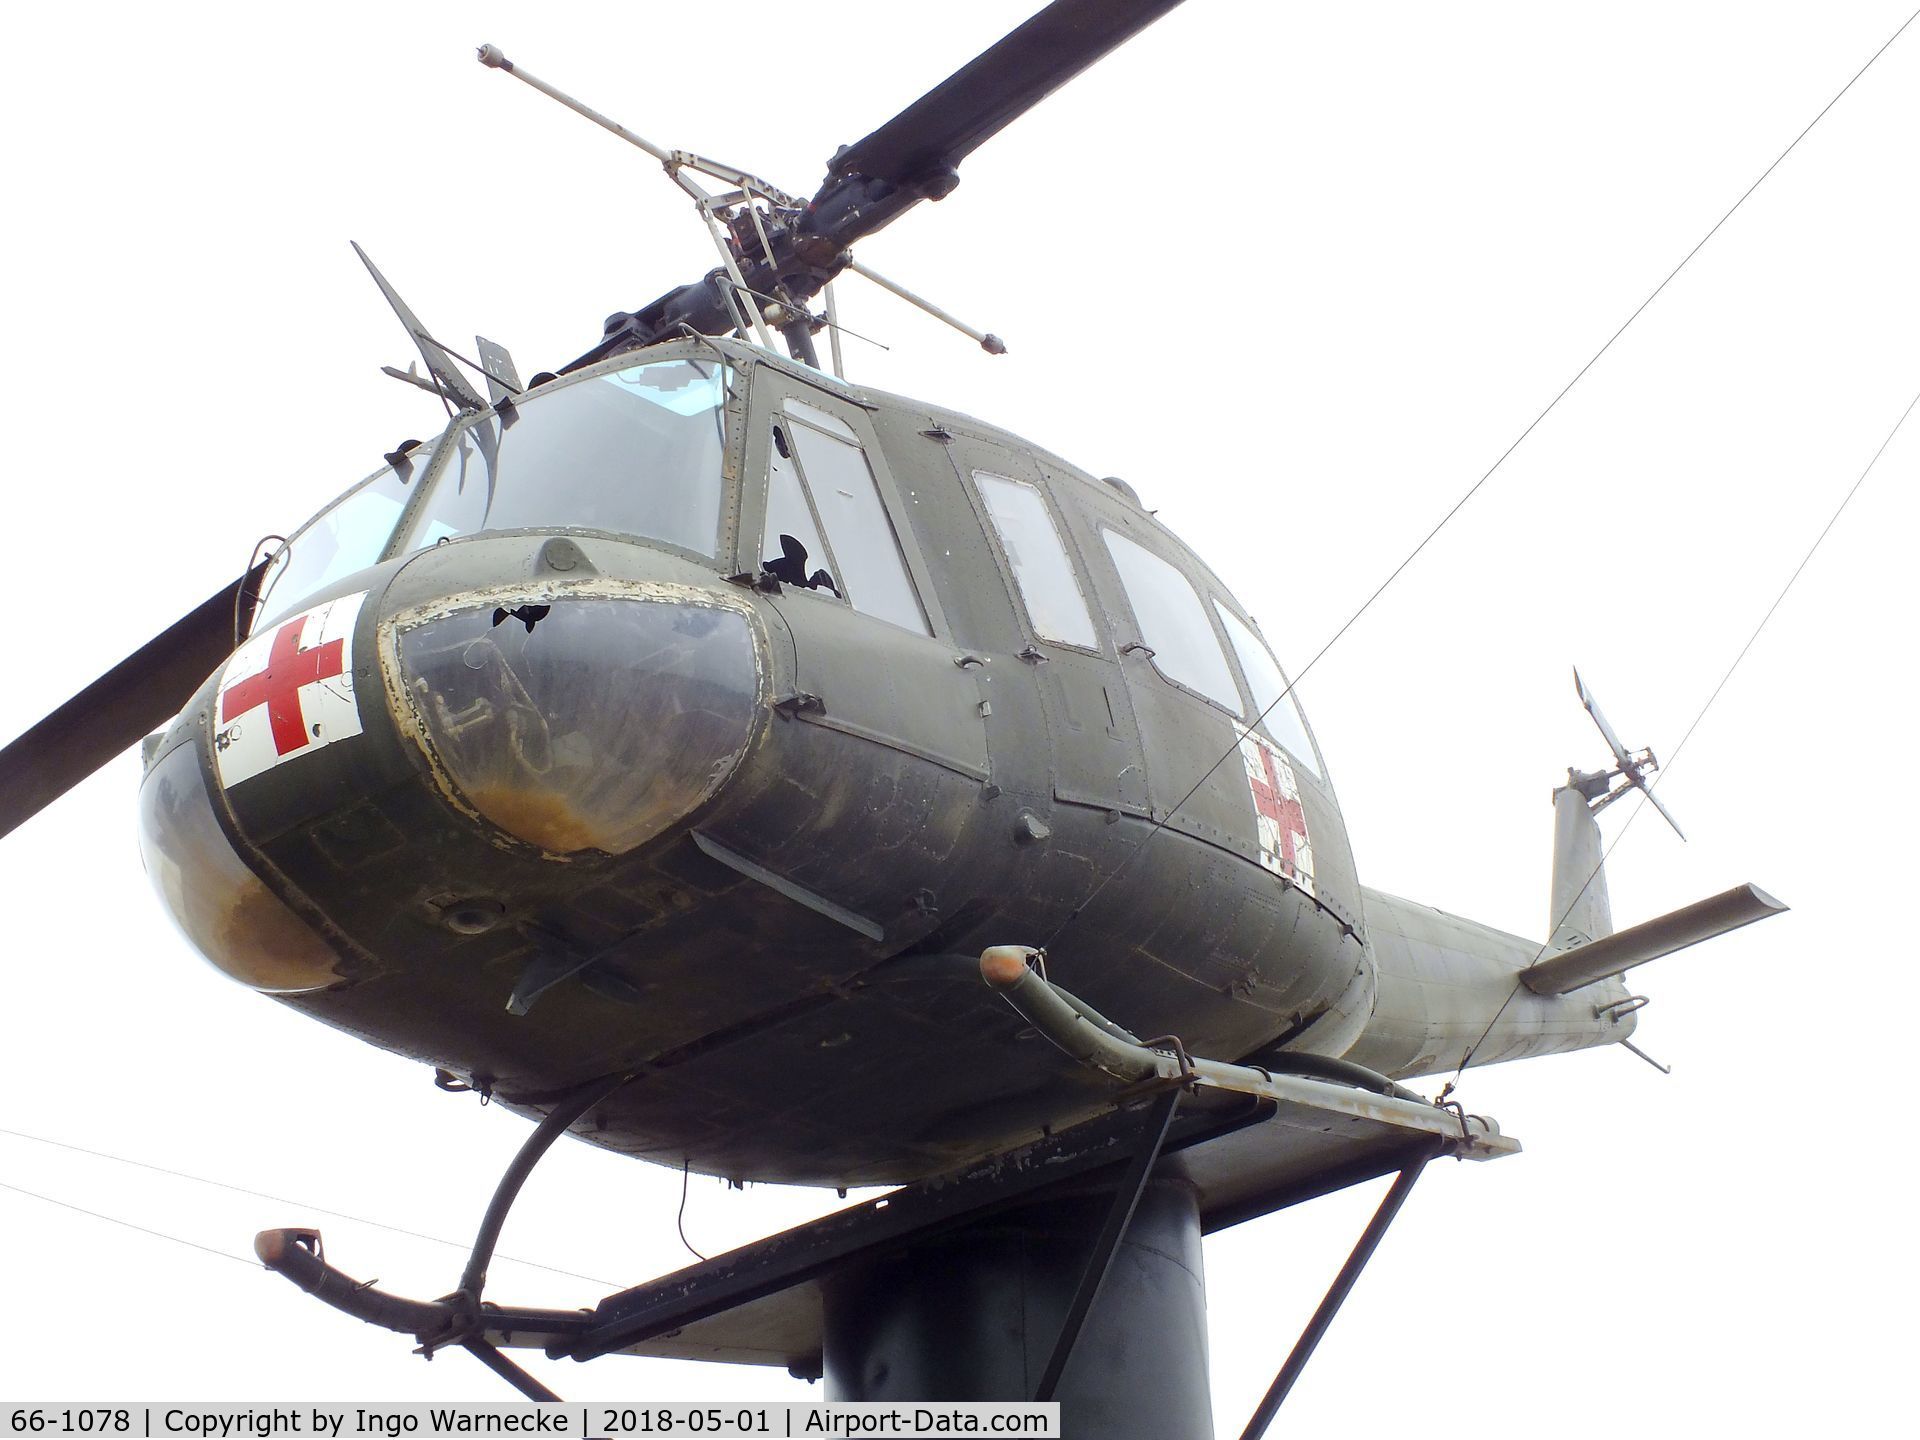 66-1078, 1966 Bell UH-1H Iroquois C/N 5561, Bell UH-1H Iroquois at the Vietnam Memorial, Big Spring TX